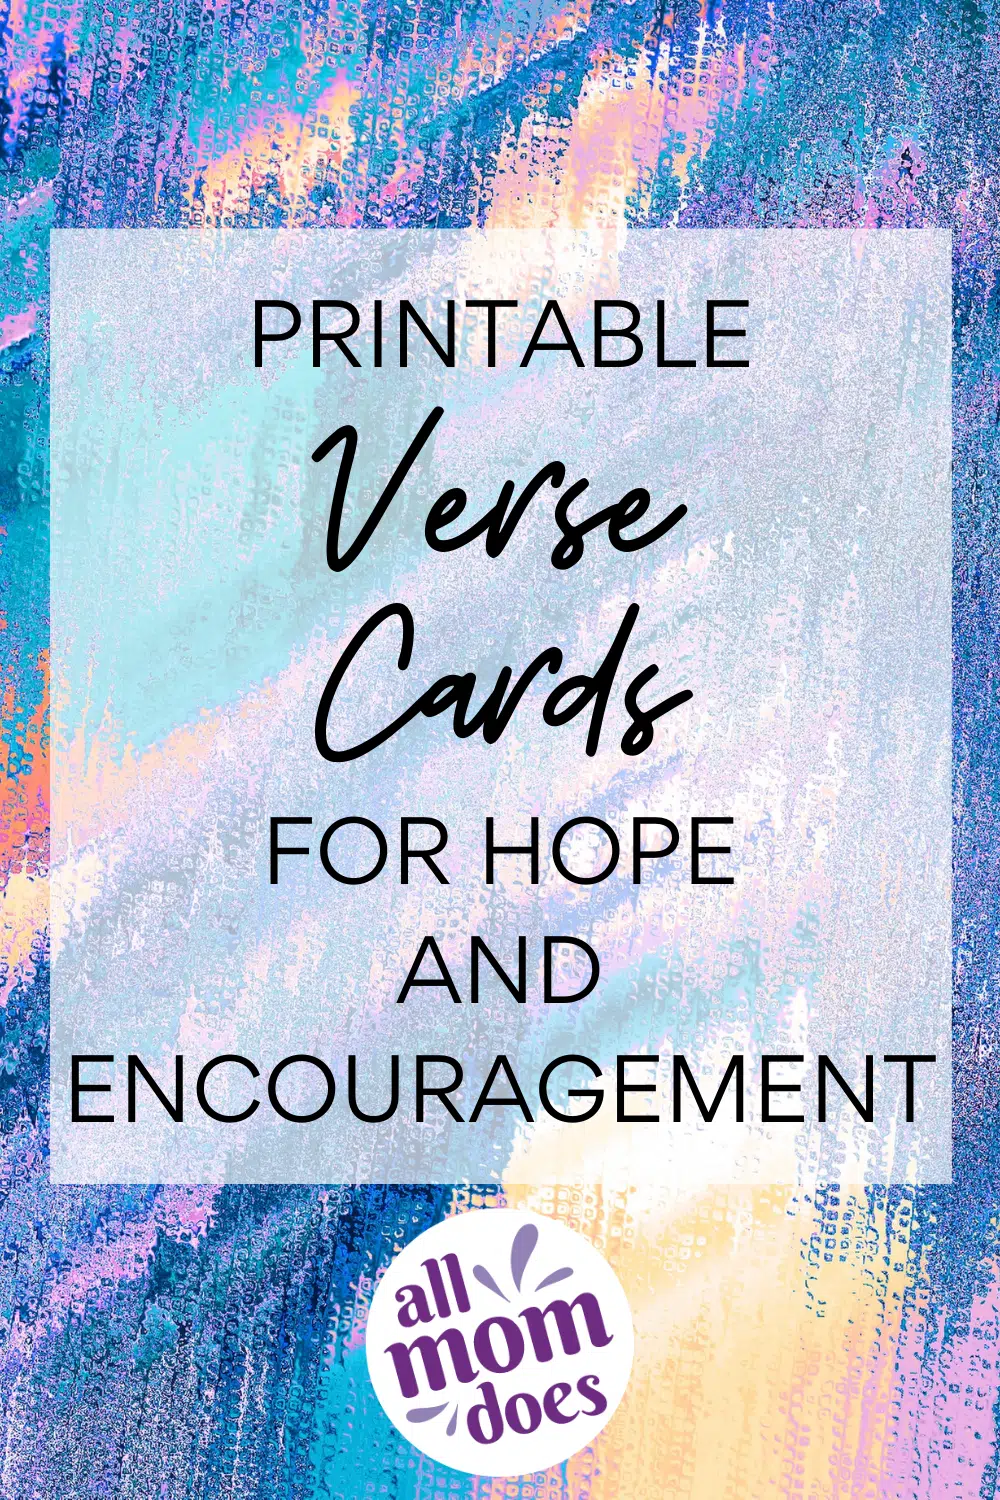 Printable Bible Verse Cards for Hope and Encouragement. Bible verses.